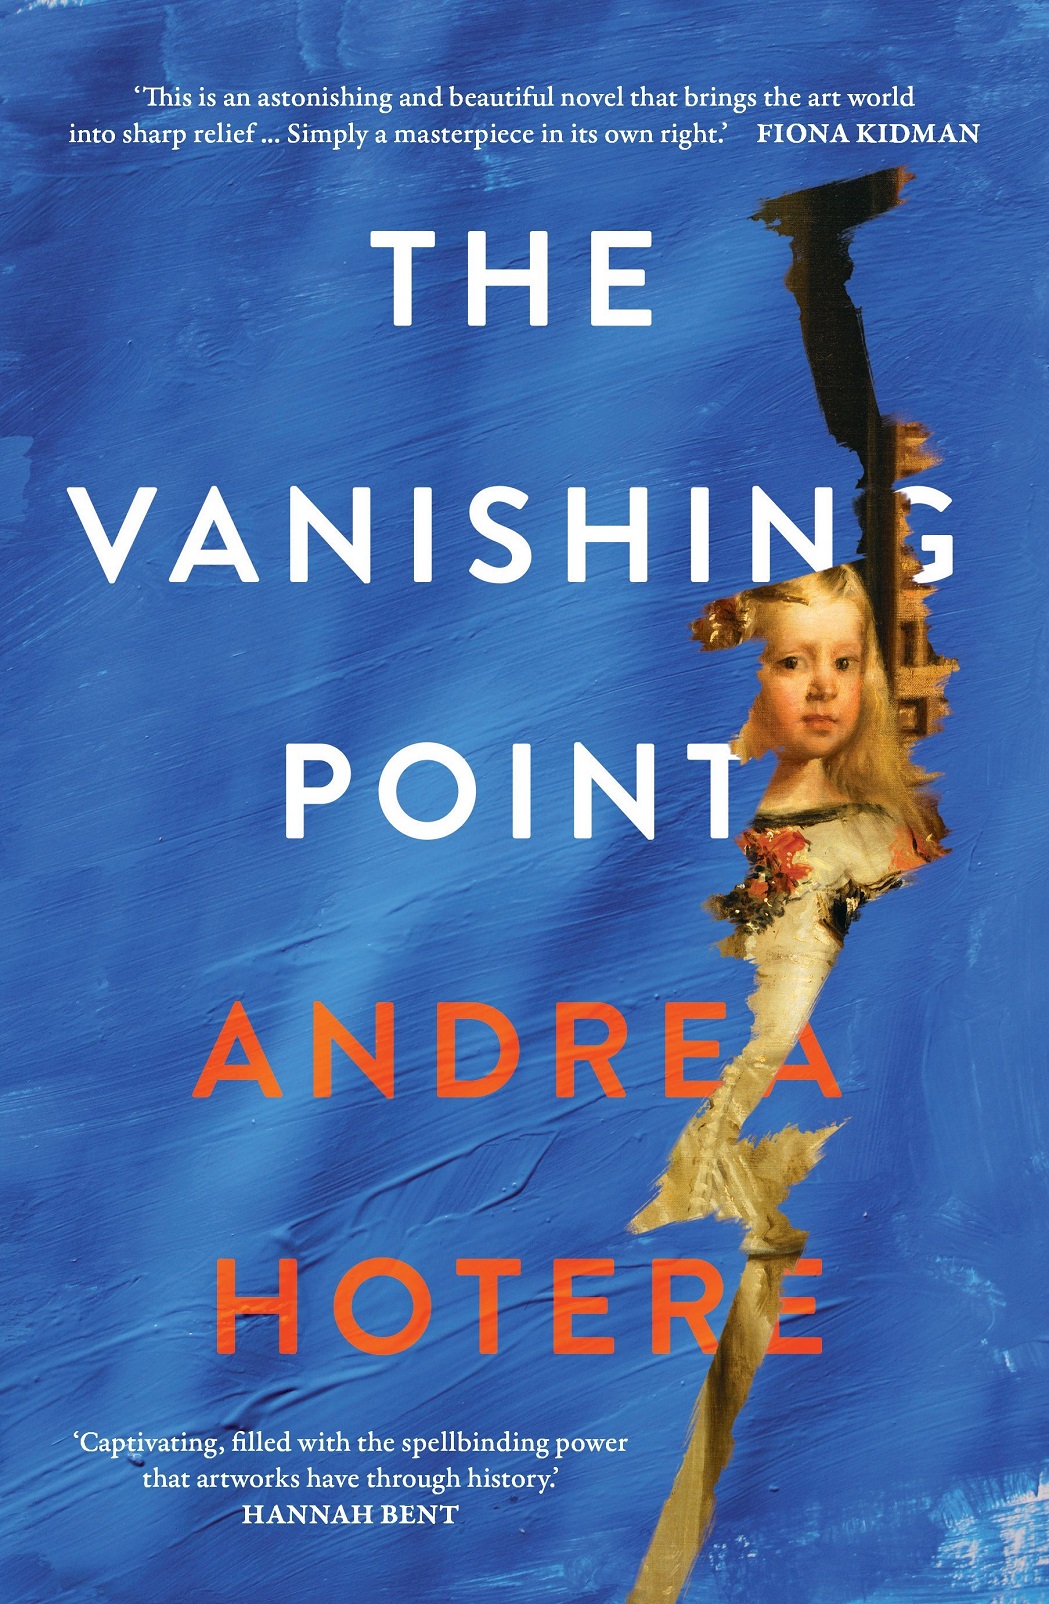 The Vanishing Point, Andrea Hotere, Ultimo Press, RRP $39.99.